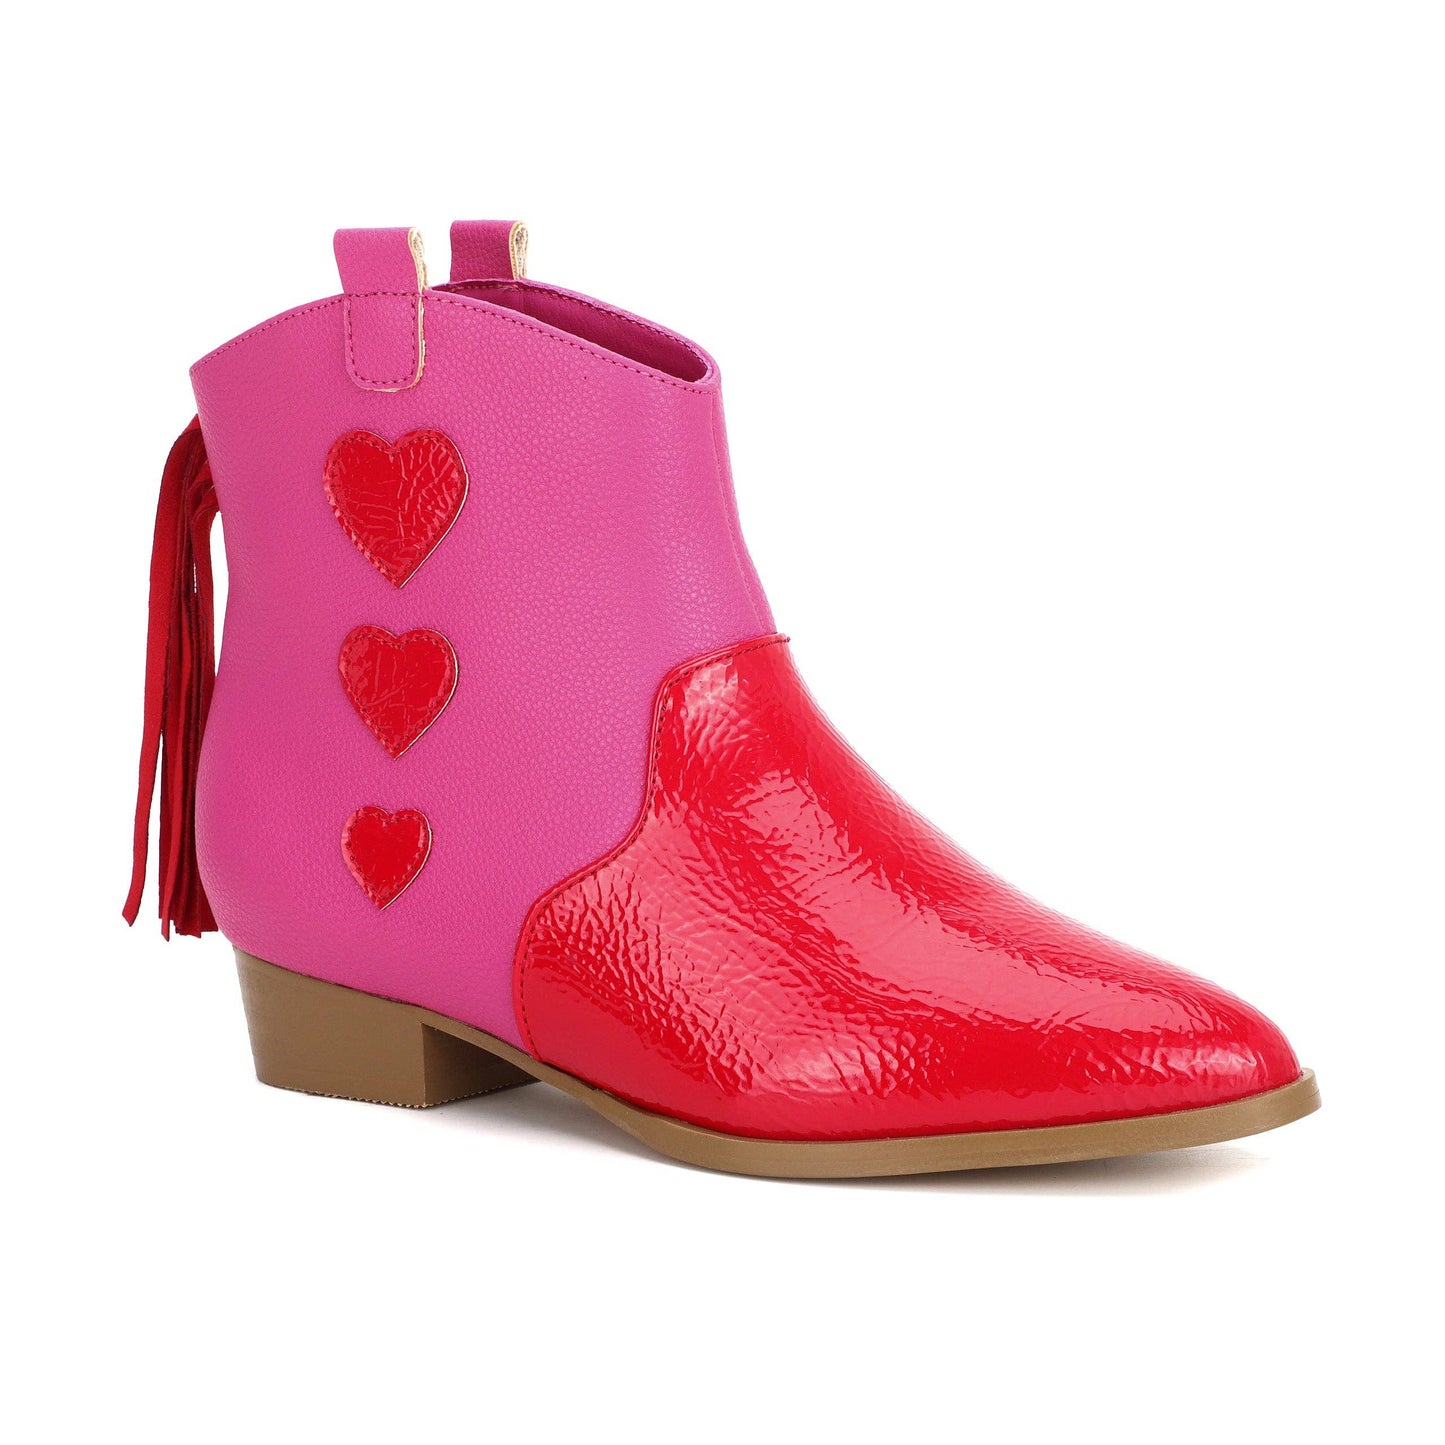 Miss Dallas Heart Western Boot - Pink/Red